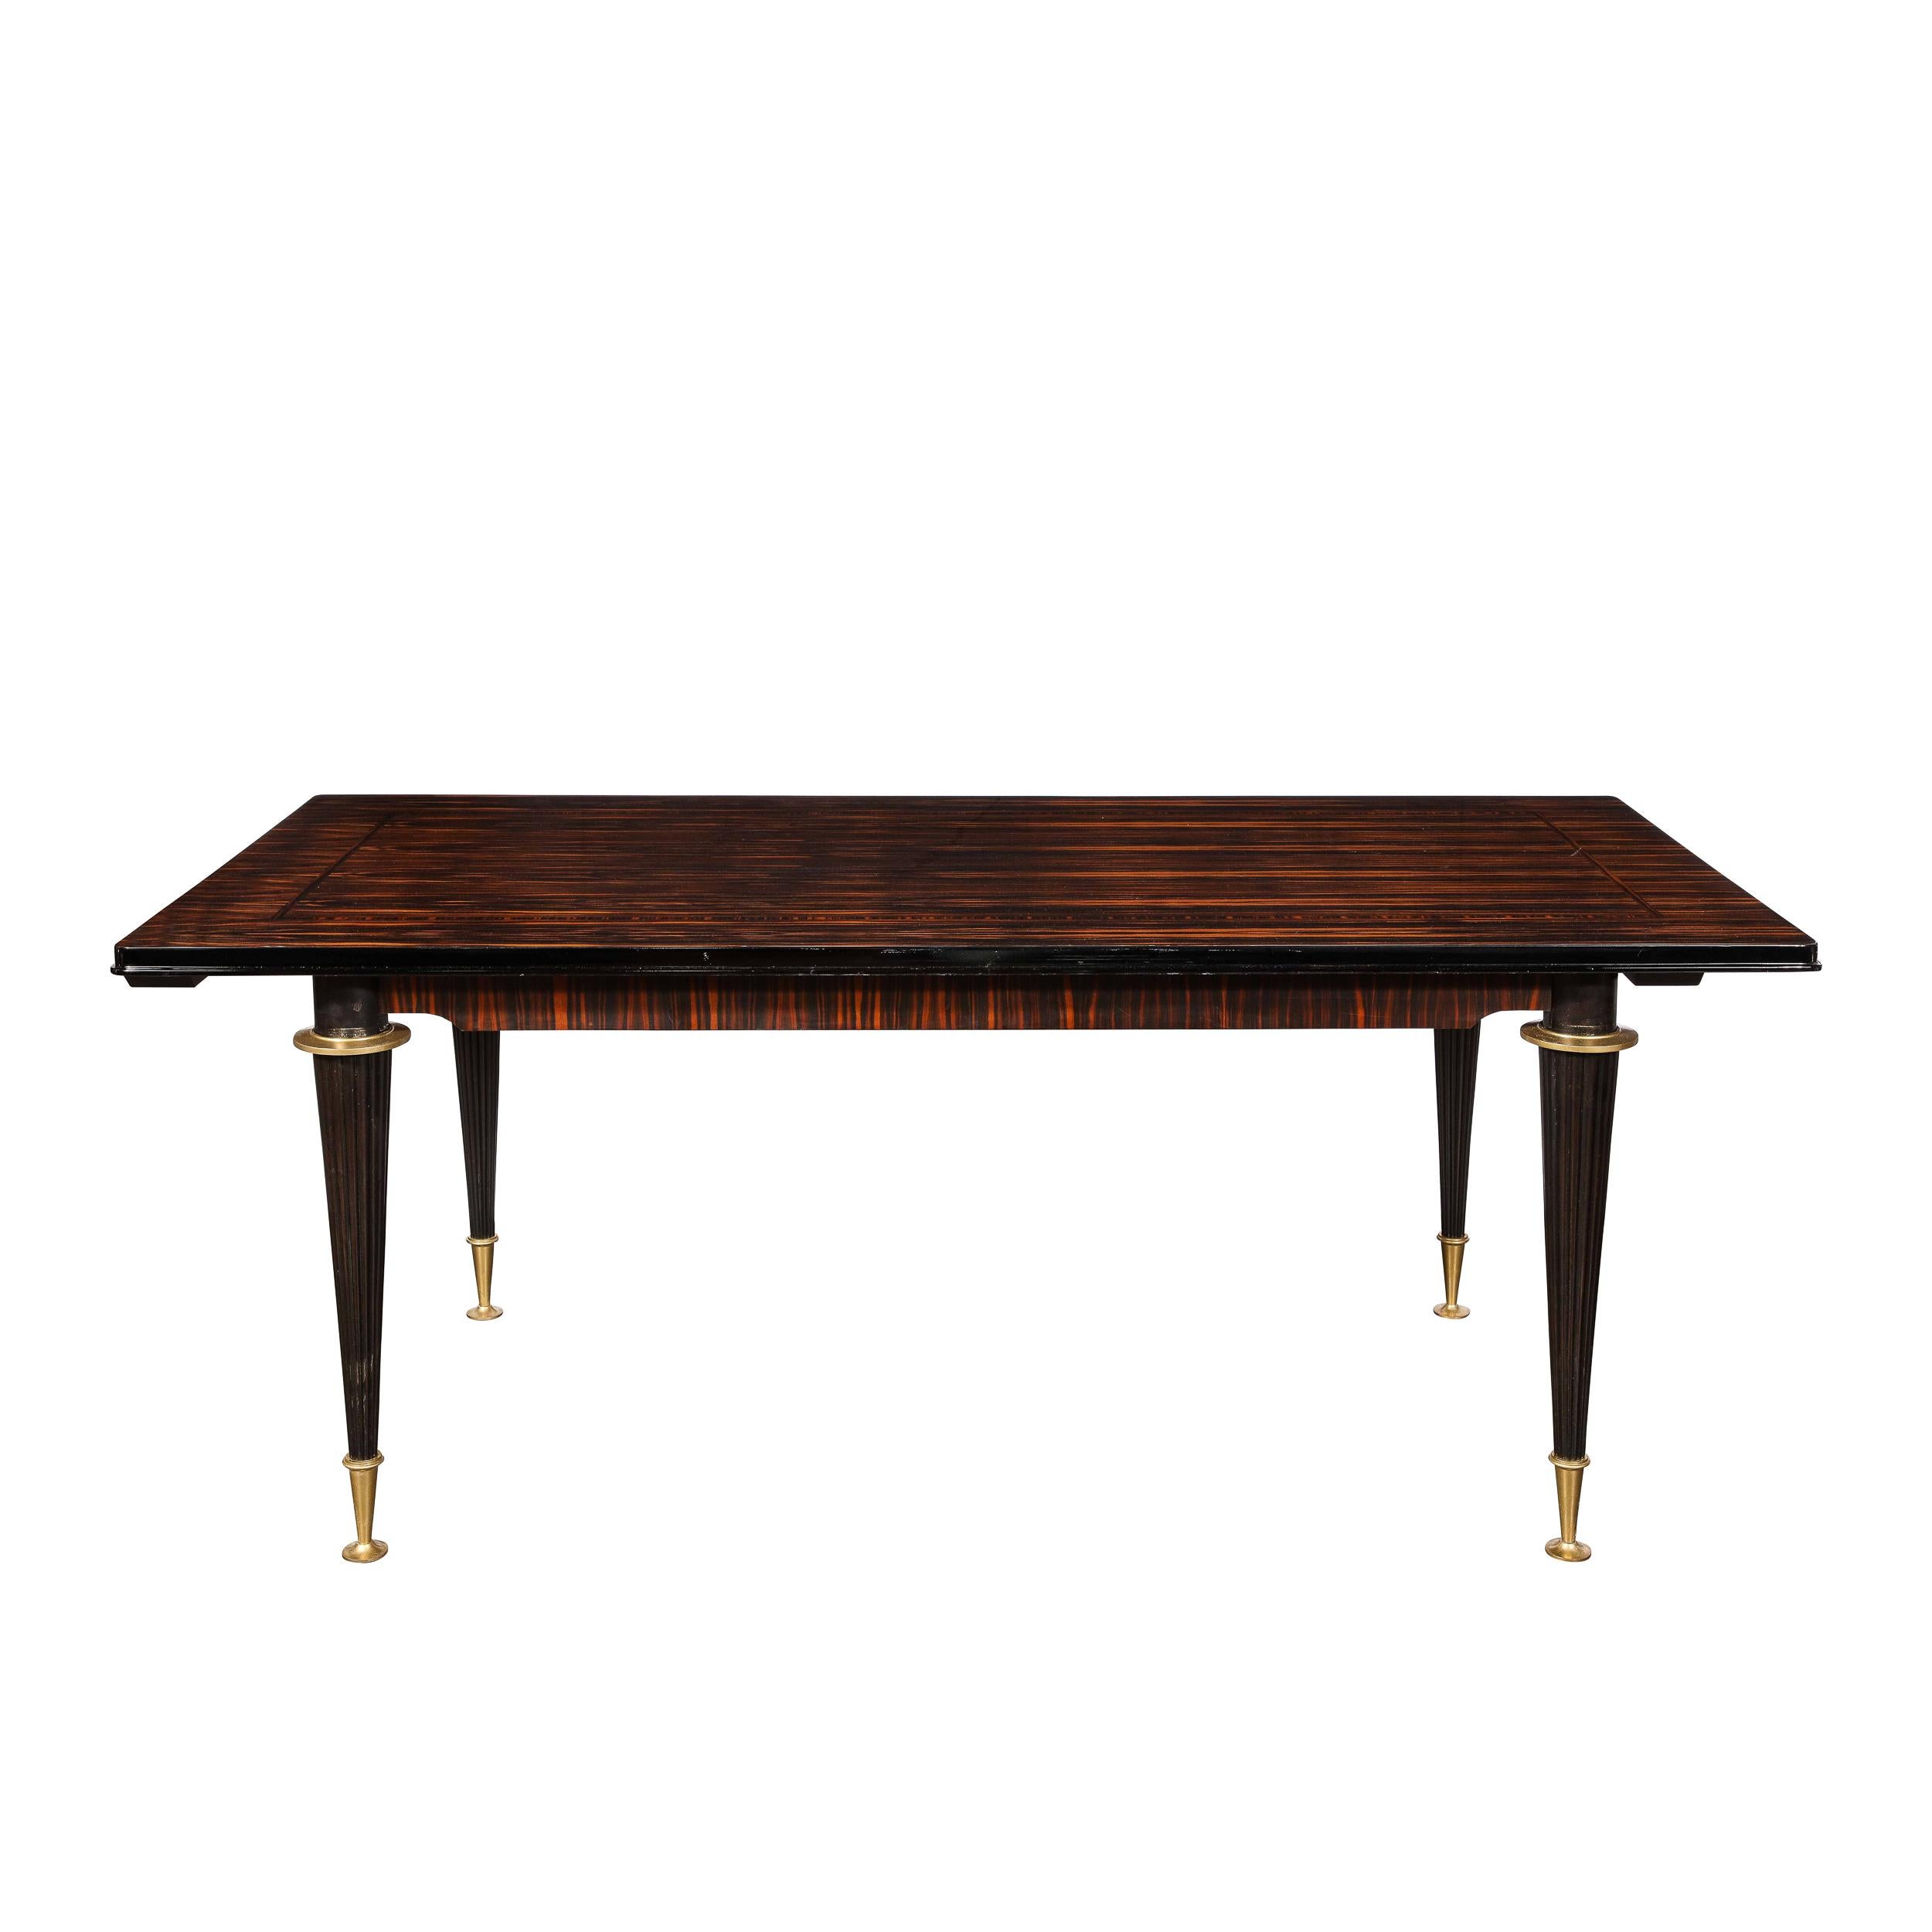 This stunning Art Deco dining table was realized in France circa 1940. Sitting on four conical ebonized legs with brass capped sabots and brass circular embellishments at the apex of each leg, this directoire style table features a dramatic